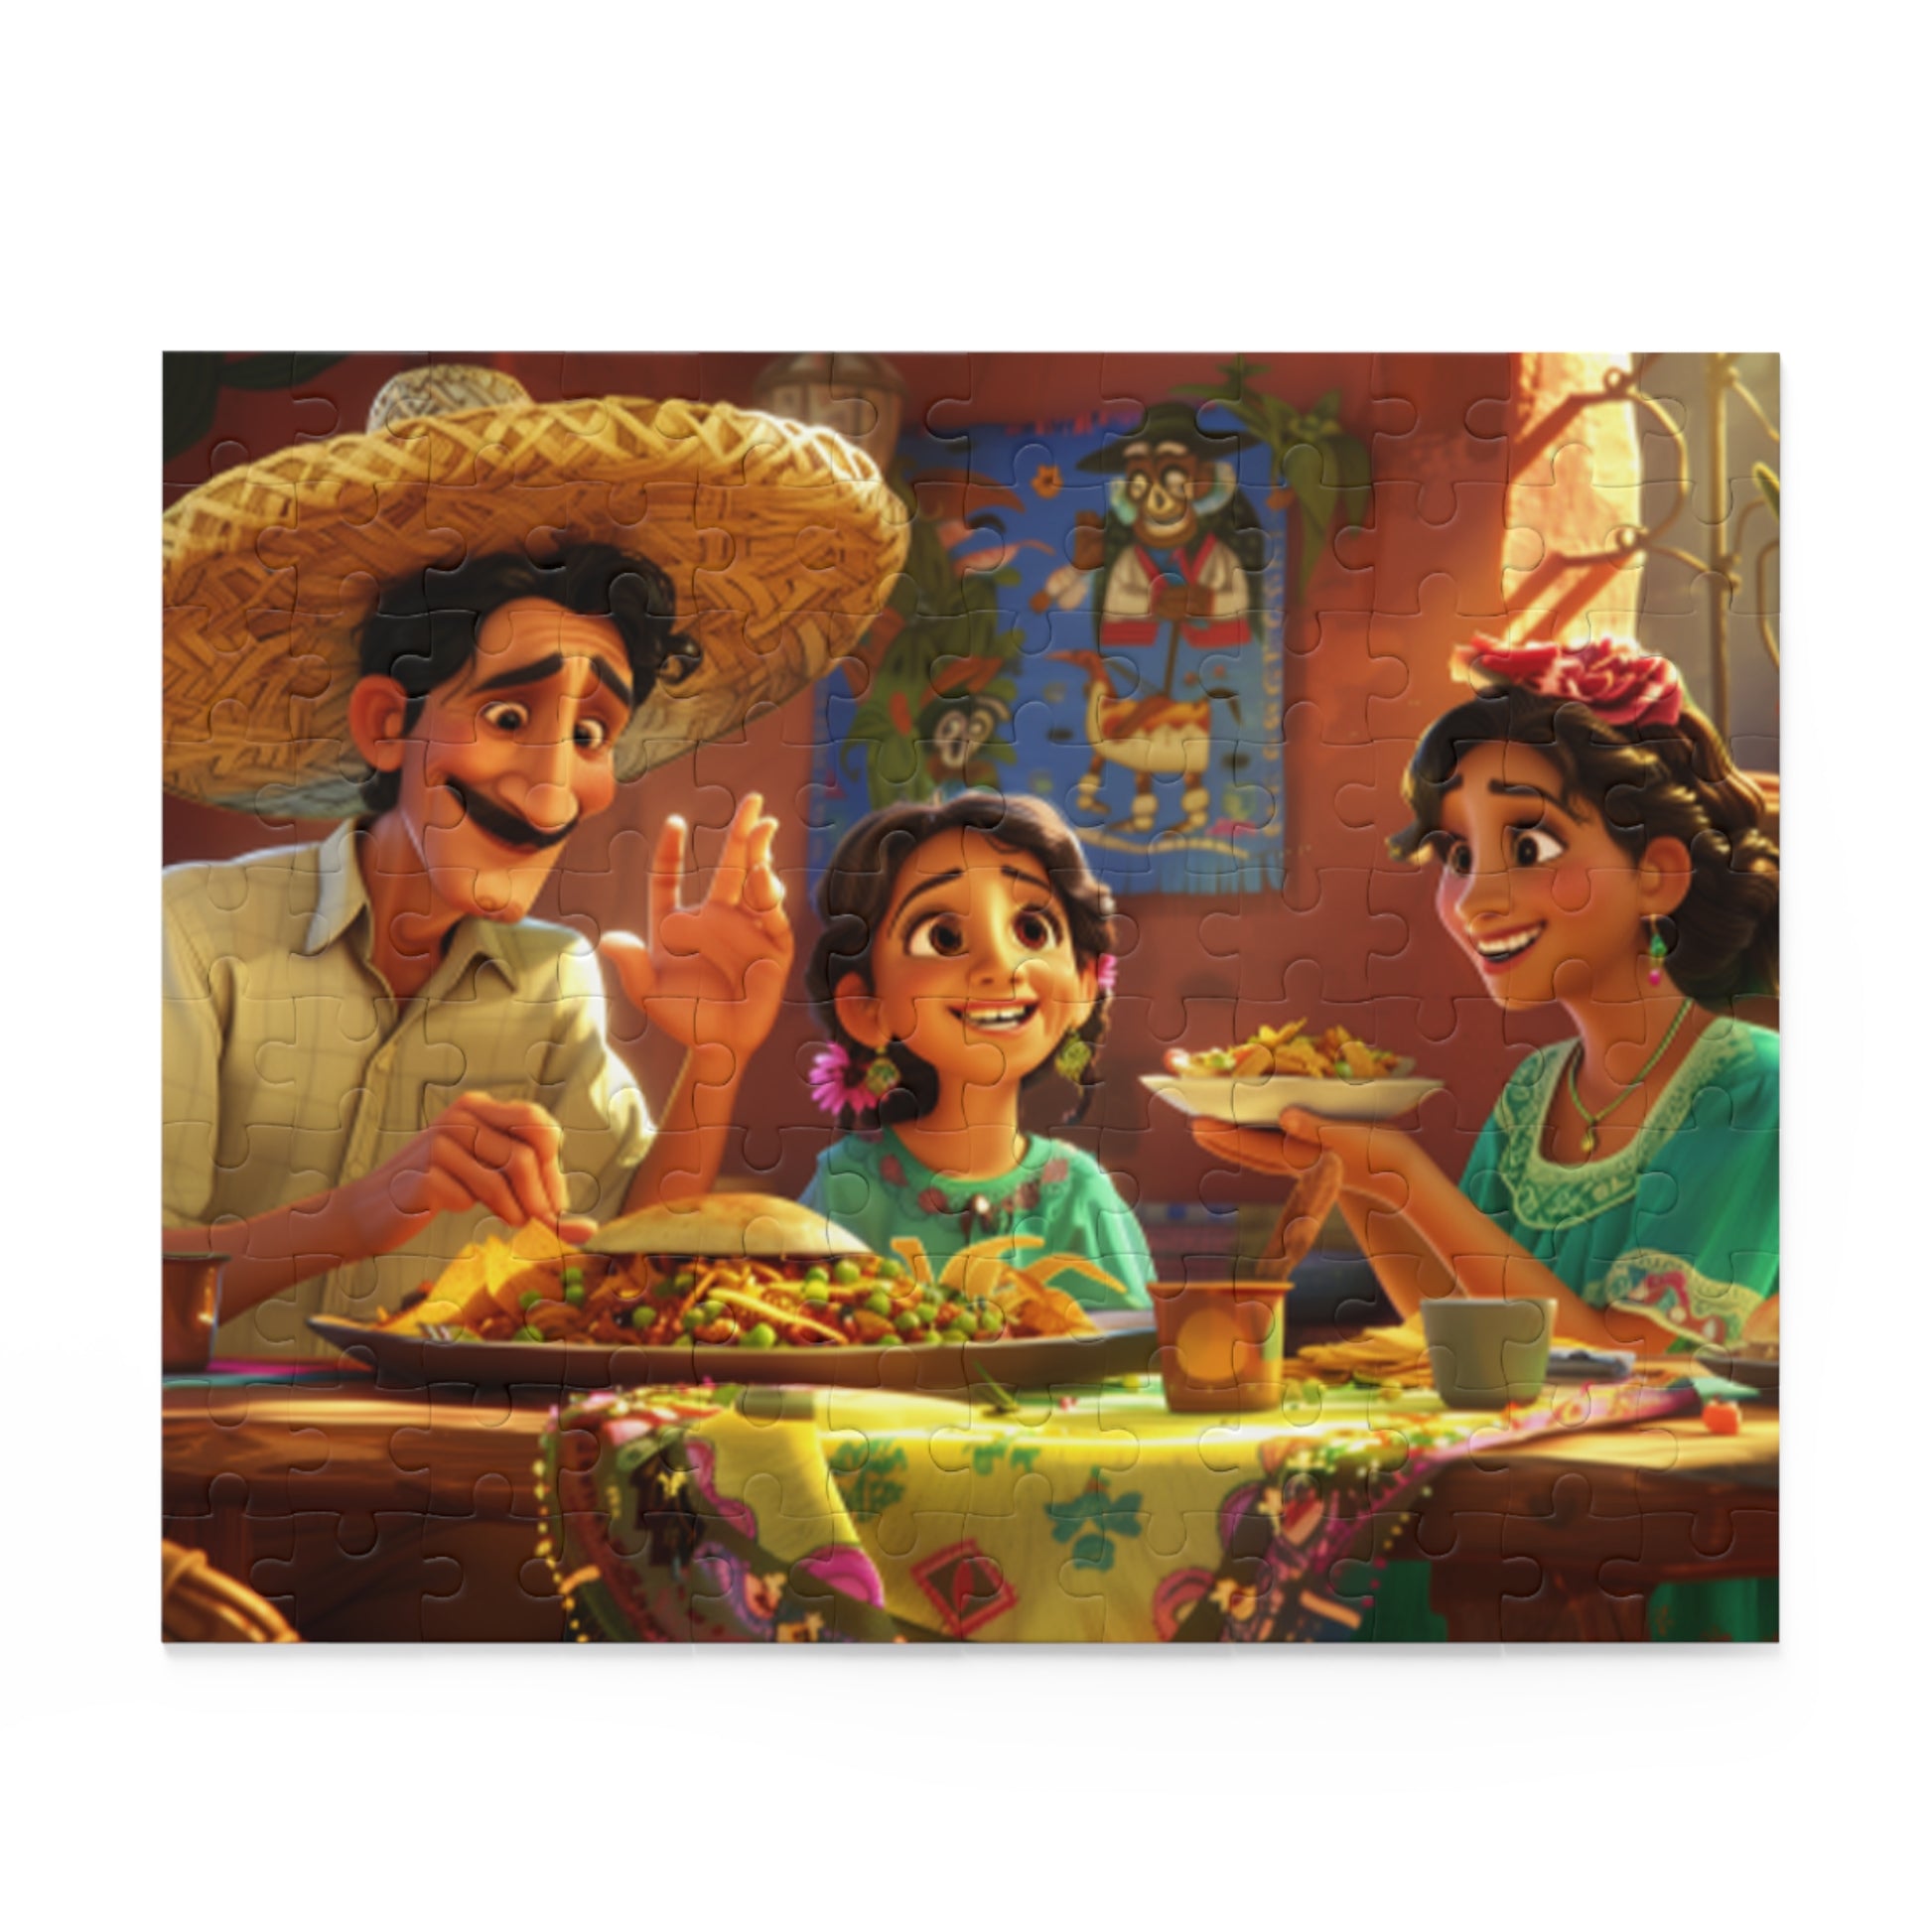 Mexican Happy Family Sitting Retro Art Jigsaw Puzzle Adult Birthday Business Jigsaw Puzzle Gift for Him Funny Humorous Indoor Outdoor Game Gift For Her Online-2